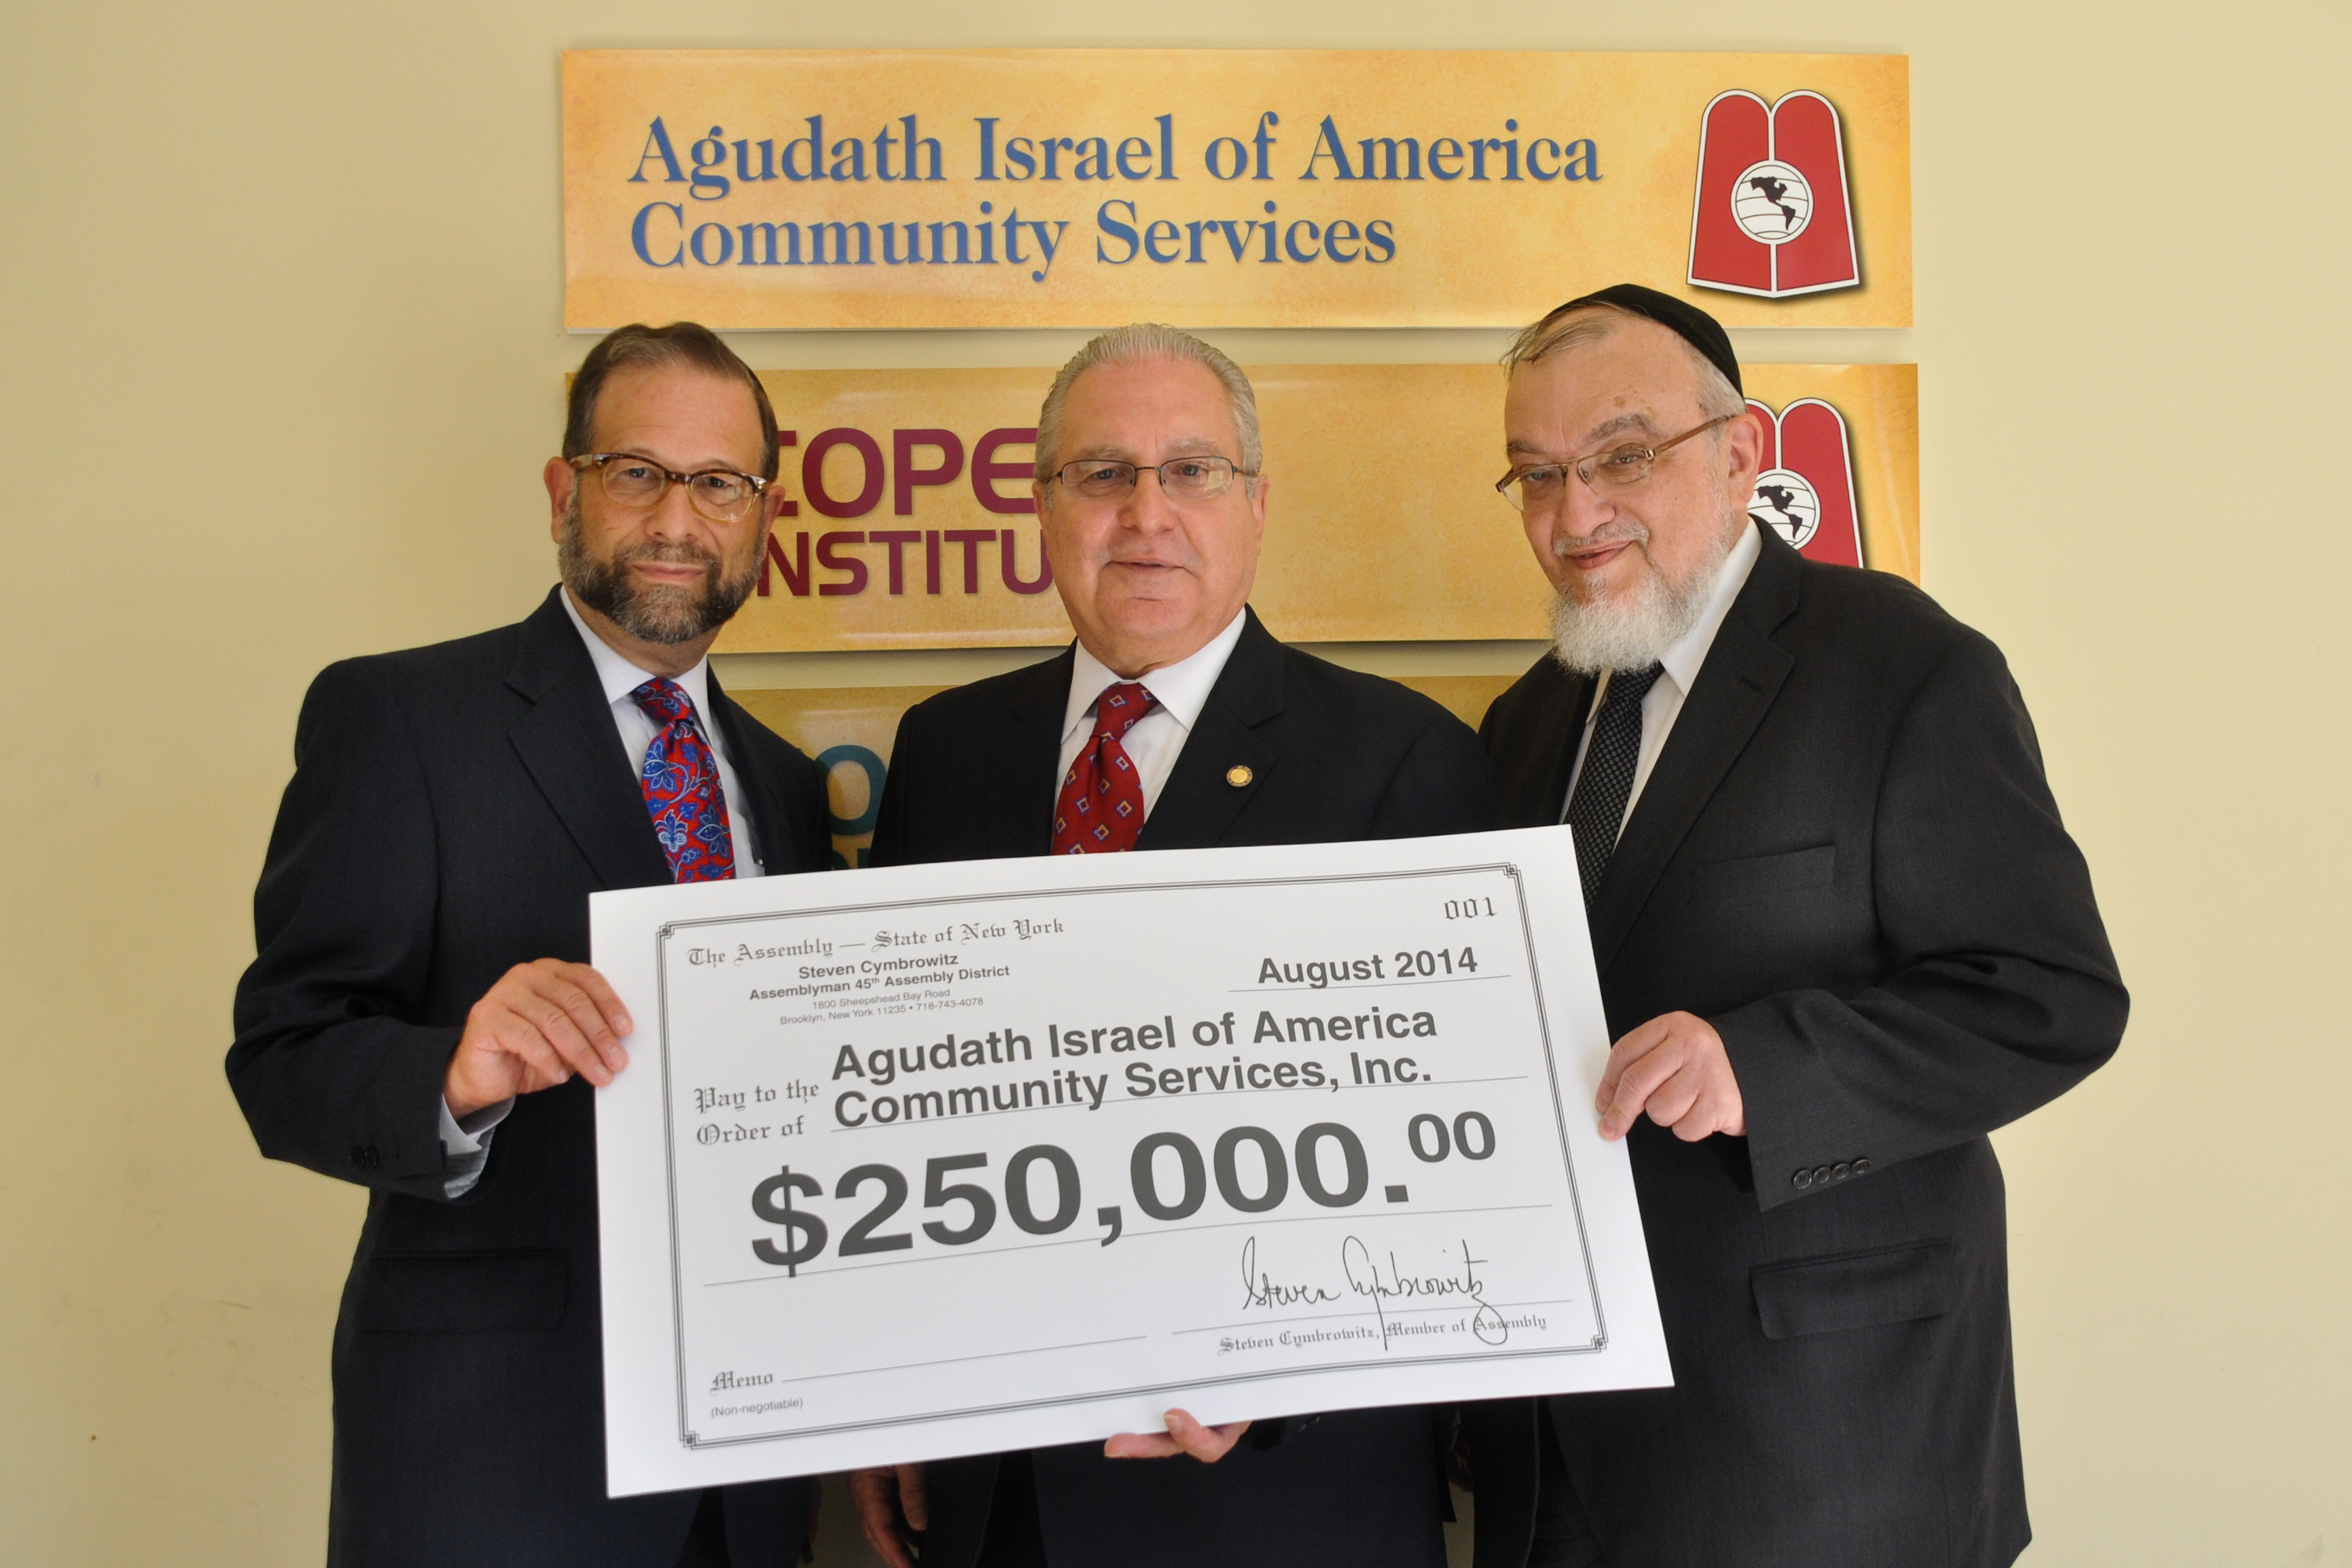 Steve Cymobrowitz presents the Capital Grant to Rabbi Shmuel Lefkowitz of Agudath Israel of America and Leon Goldenberg whom was a Key member of the team which sought to secure these funds for COPE institute. 